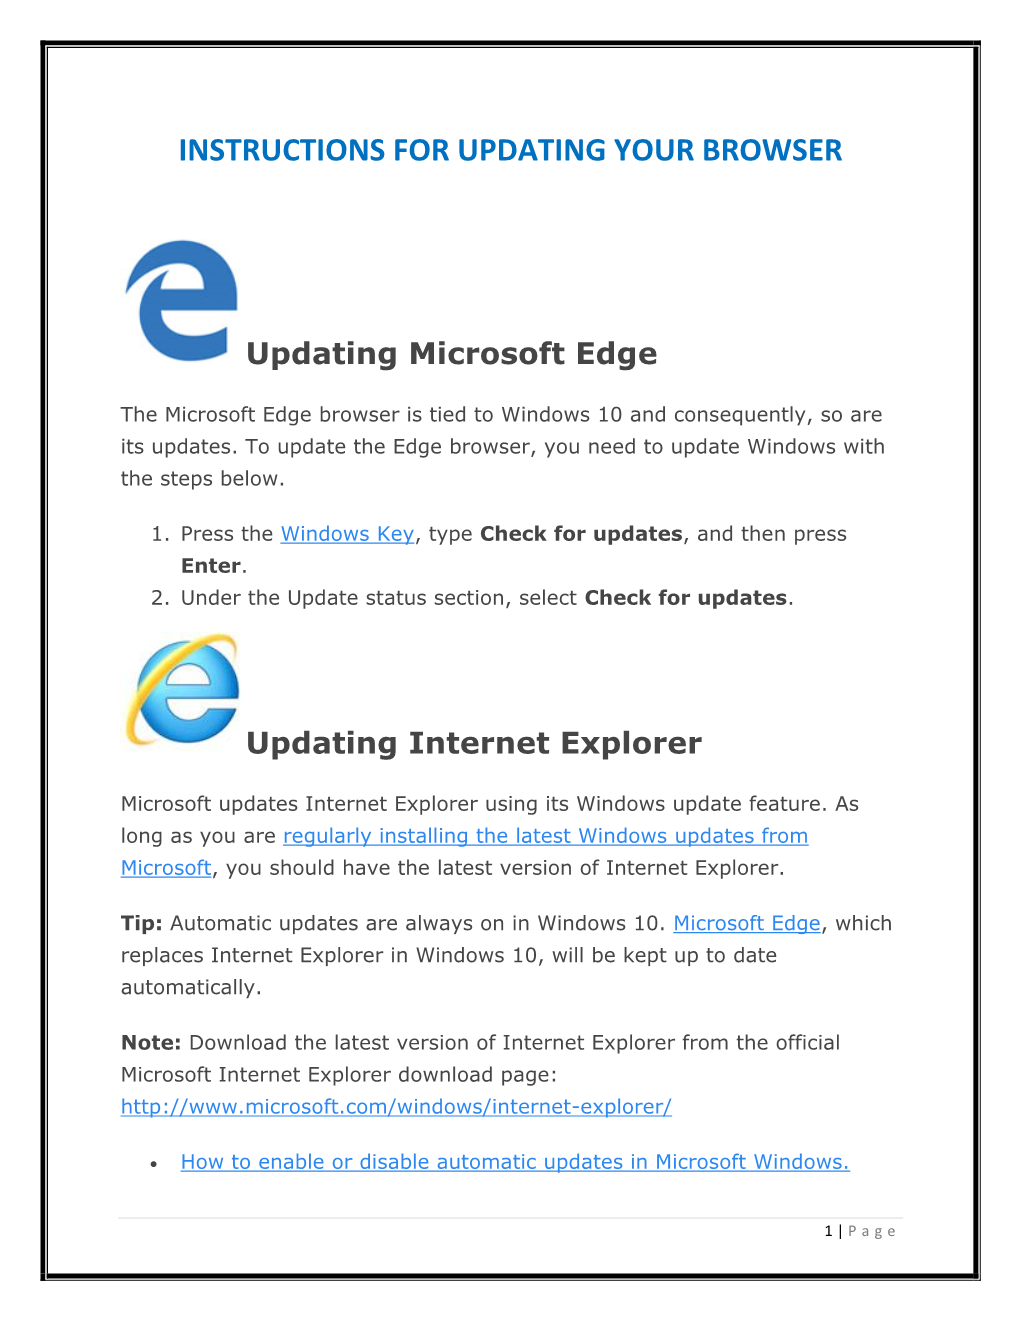 Instructions for Updating Your Browser